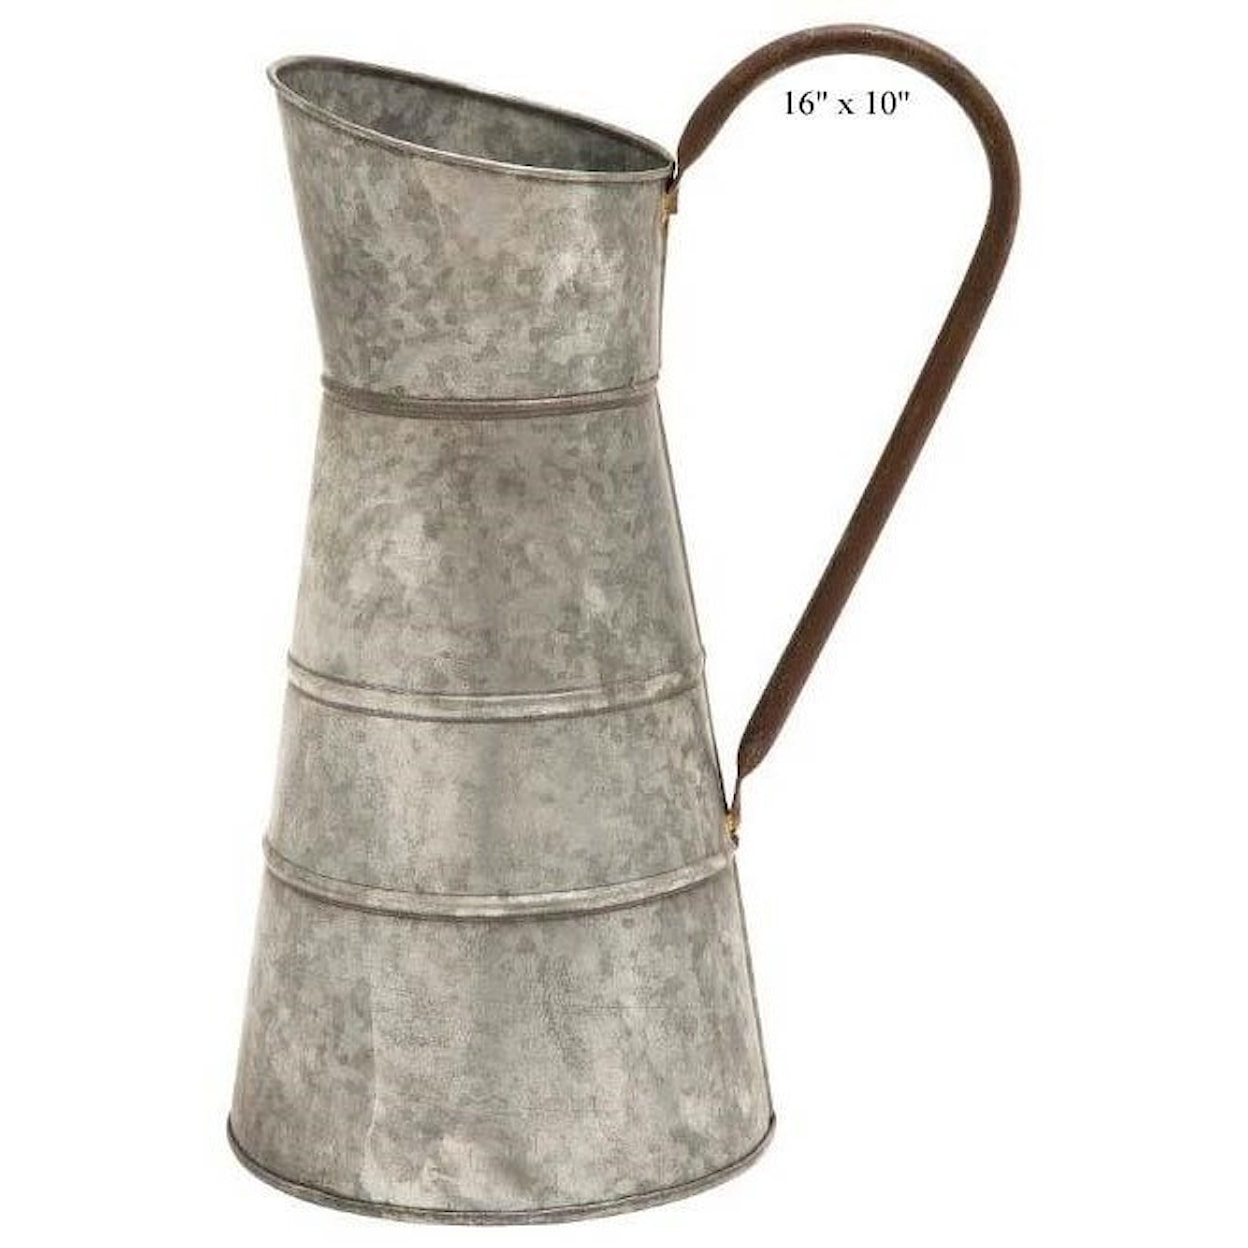 Will's Company Accents Water Jug - 16"x 10"